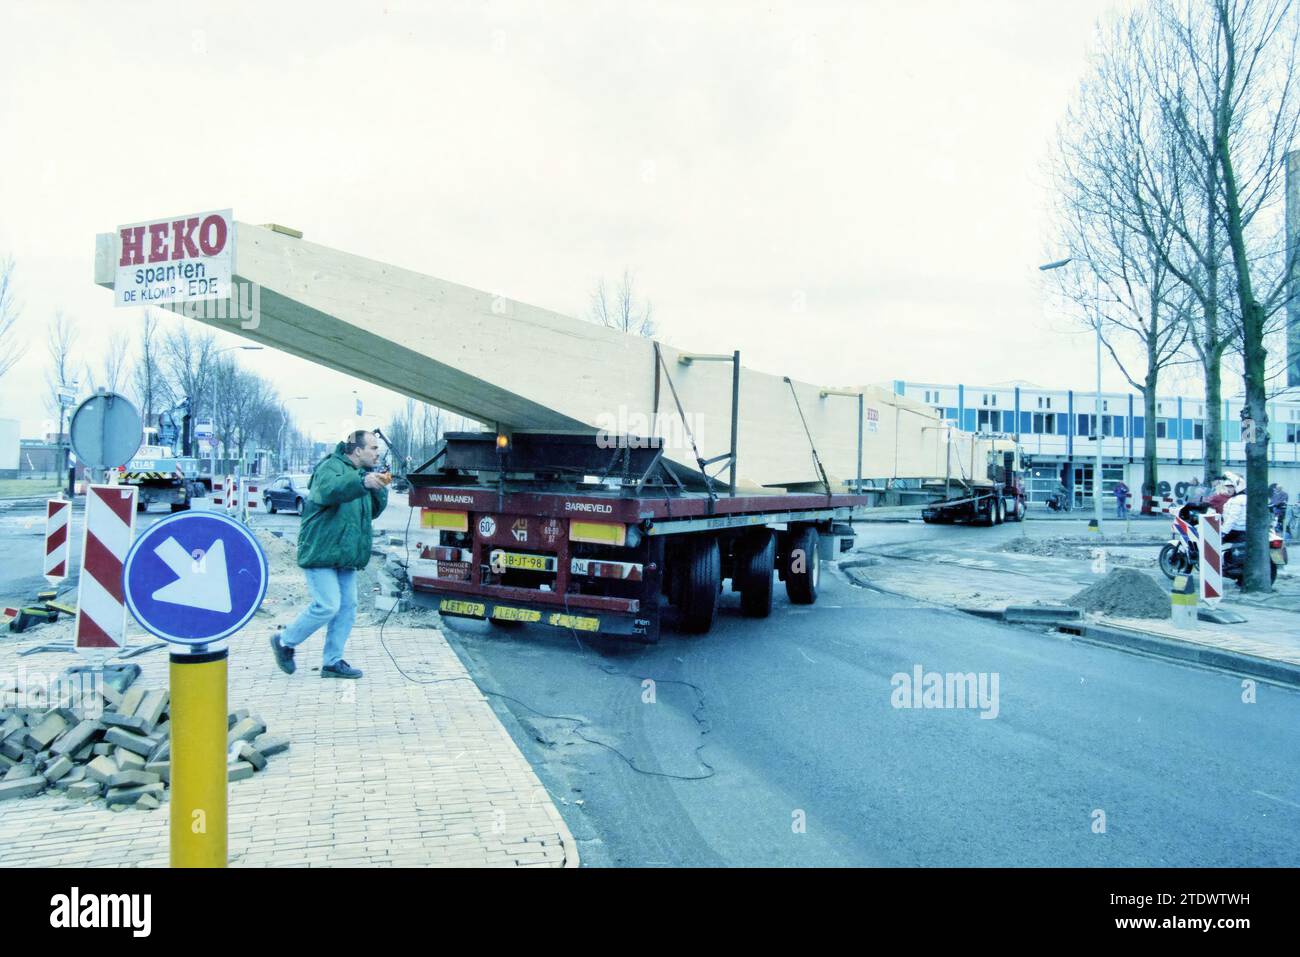 Installation + transport of 34 meters of trusses, 25-02-1996, Whizgle News from the Past, Tailored for the Future. Explore historical narratives, Dutch The Netherlands agency image with a modern perspective, bridging the gap between yesterday's events and tomorrow's insights. A timeless journey shaping the stories that shape our future Stock Photo